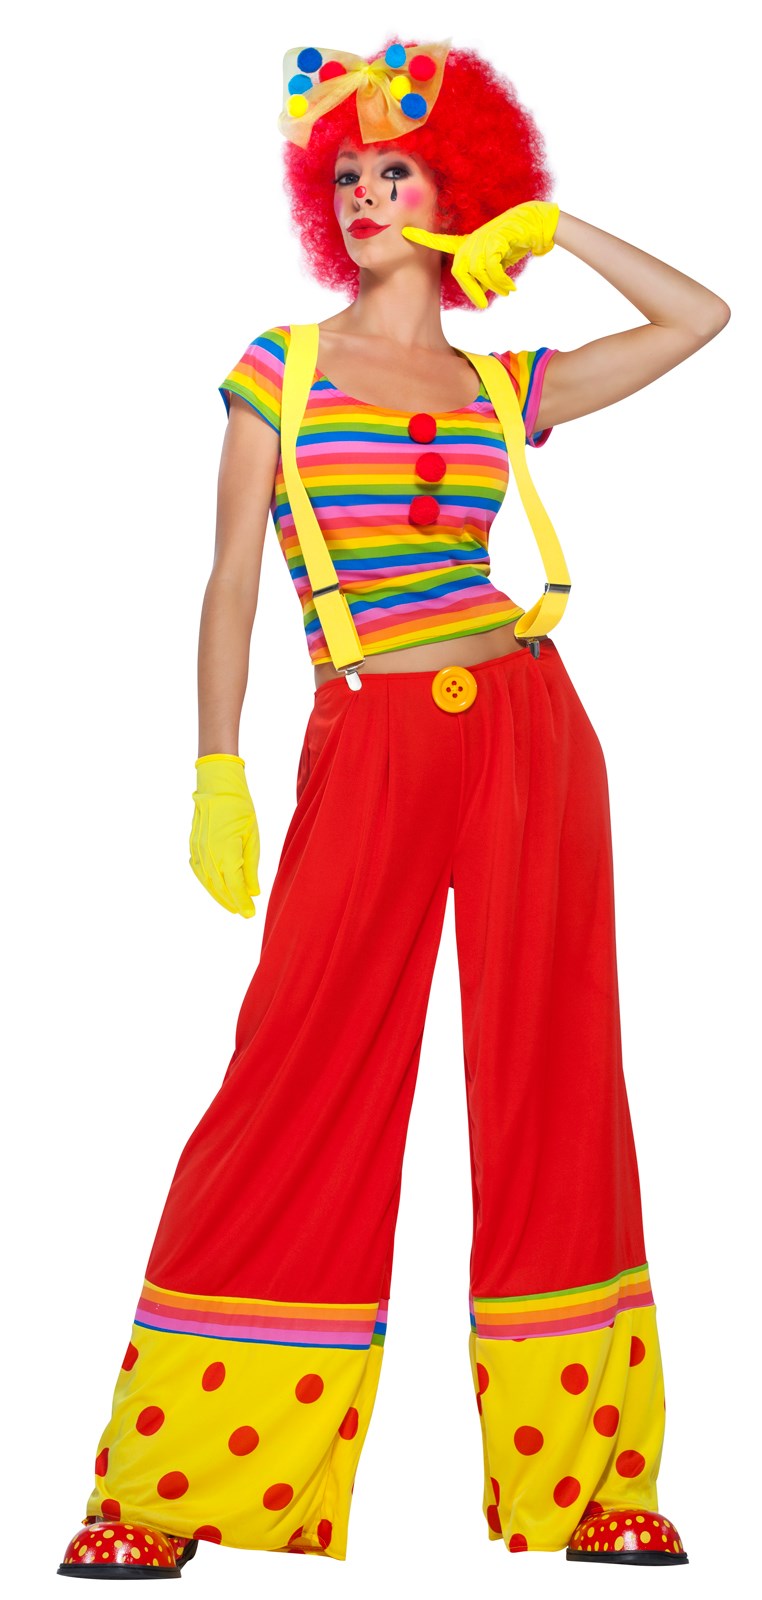 Moppie The Clown – Adult Costume